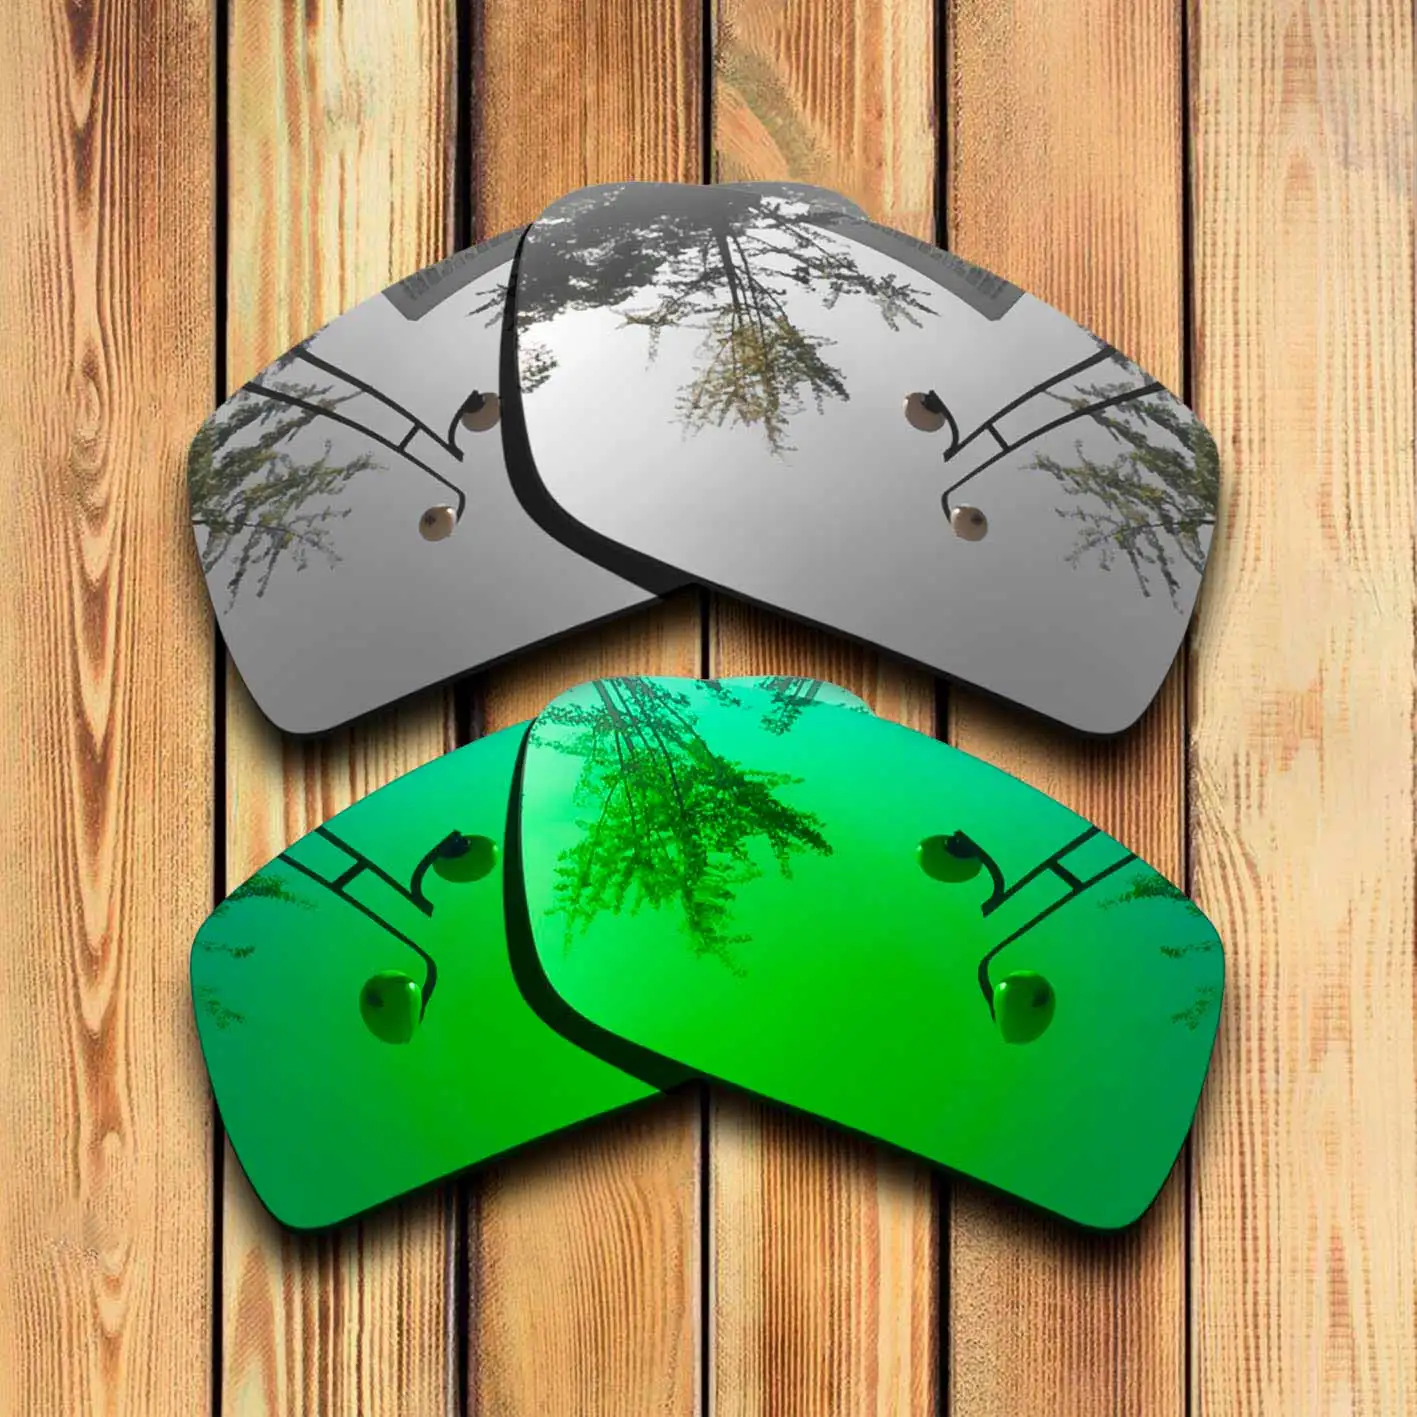 100% Precisely Cut Polarized Replacement Lenses for Gascan small Sunglasses  Chrome & Green Combine Options